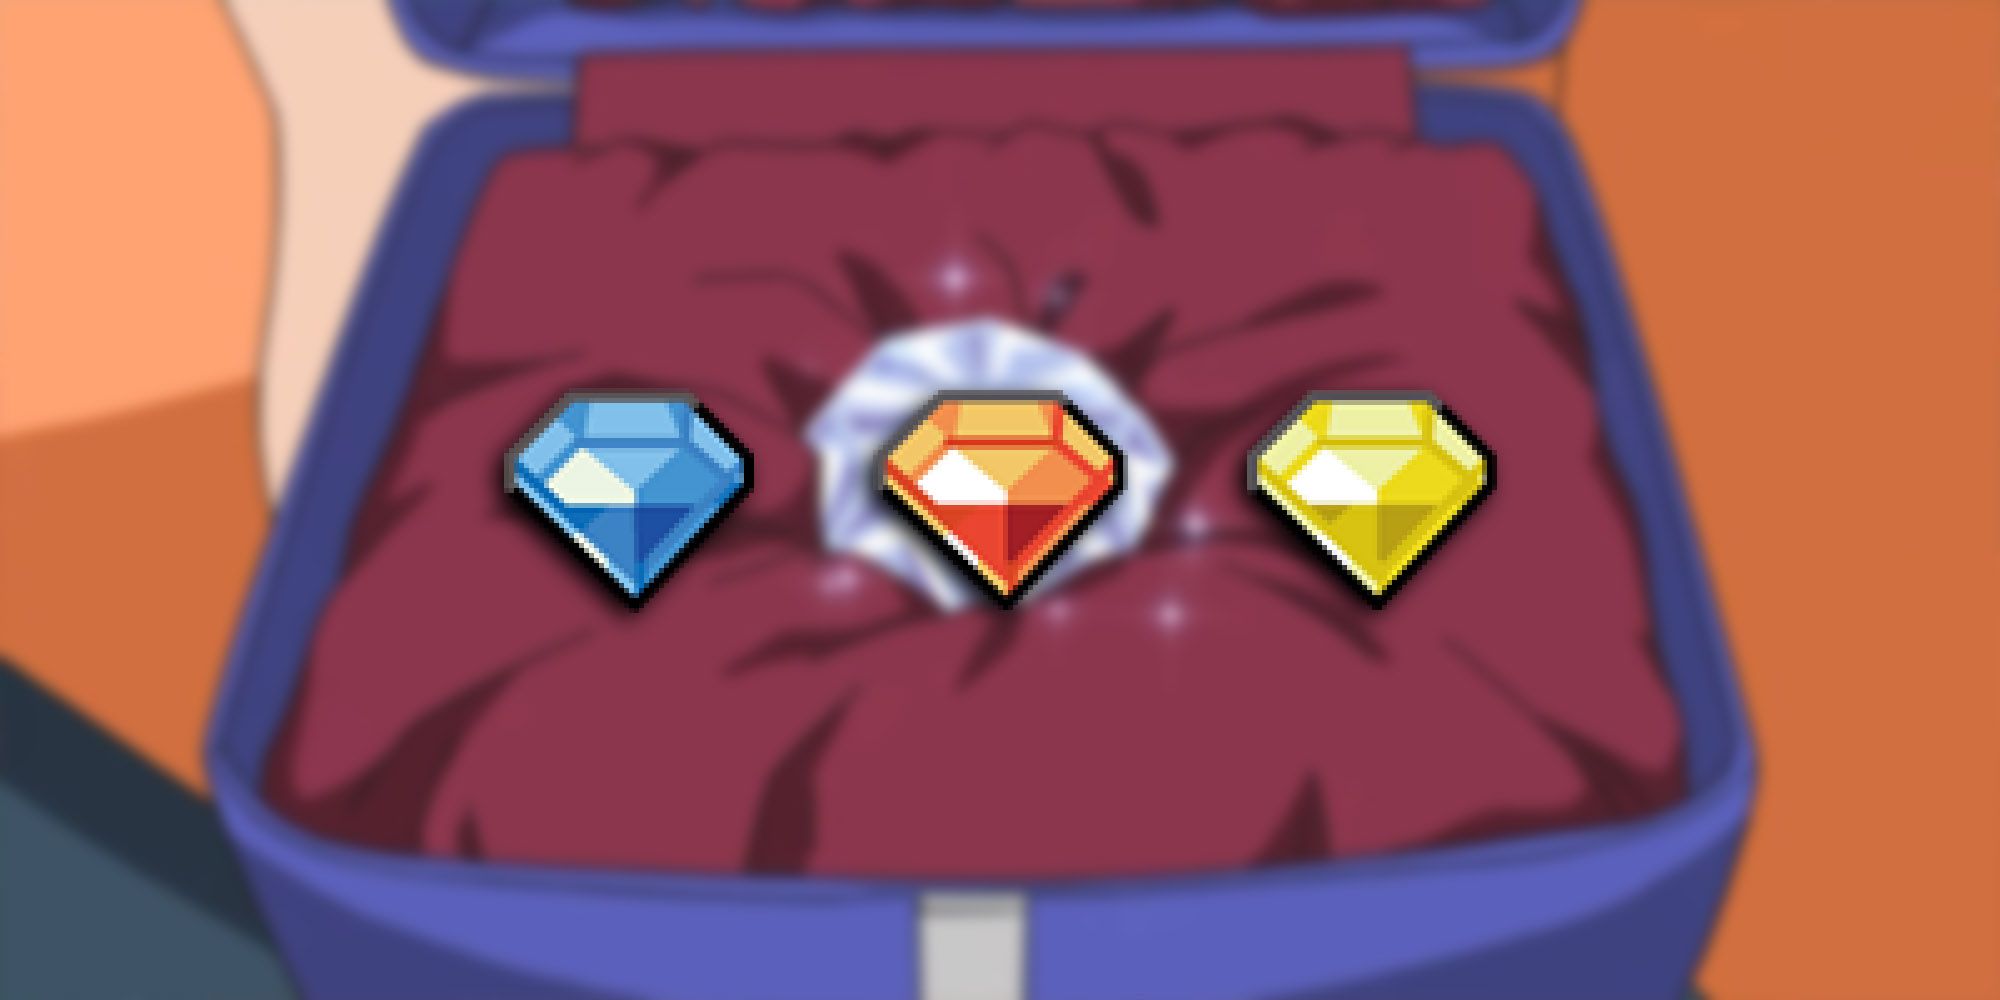 Pokemon - Elemental Gem Revealed In Anime With PNGs For Fire Water and Electric Gems On Top